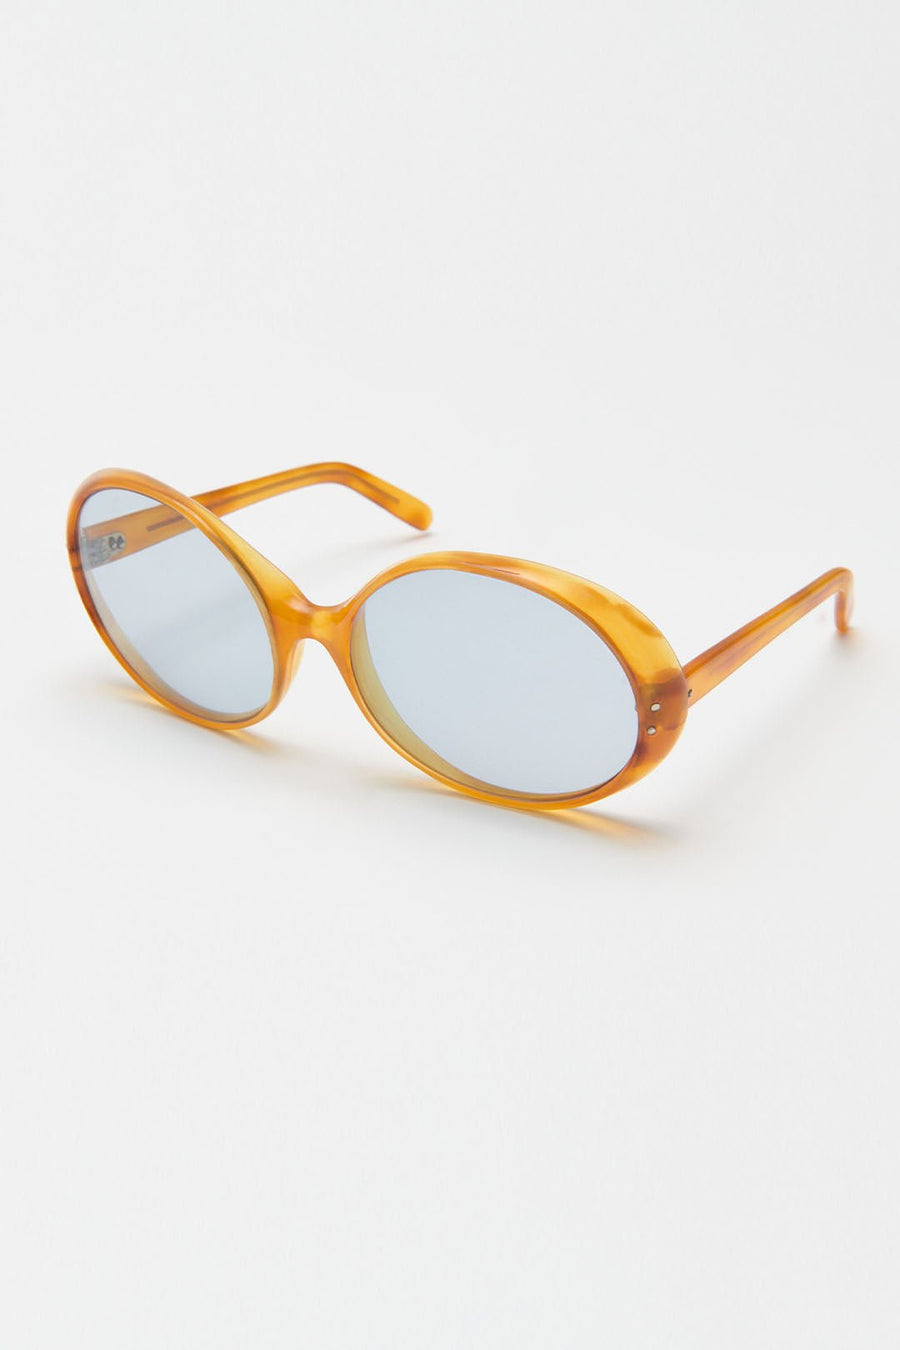 VINTAGE RANDOM OVAL SUNGLASSES, YELLOW - Burning Torch Online Boutique